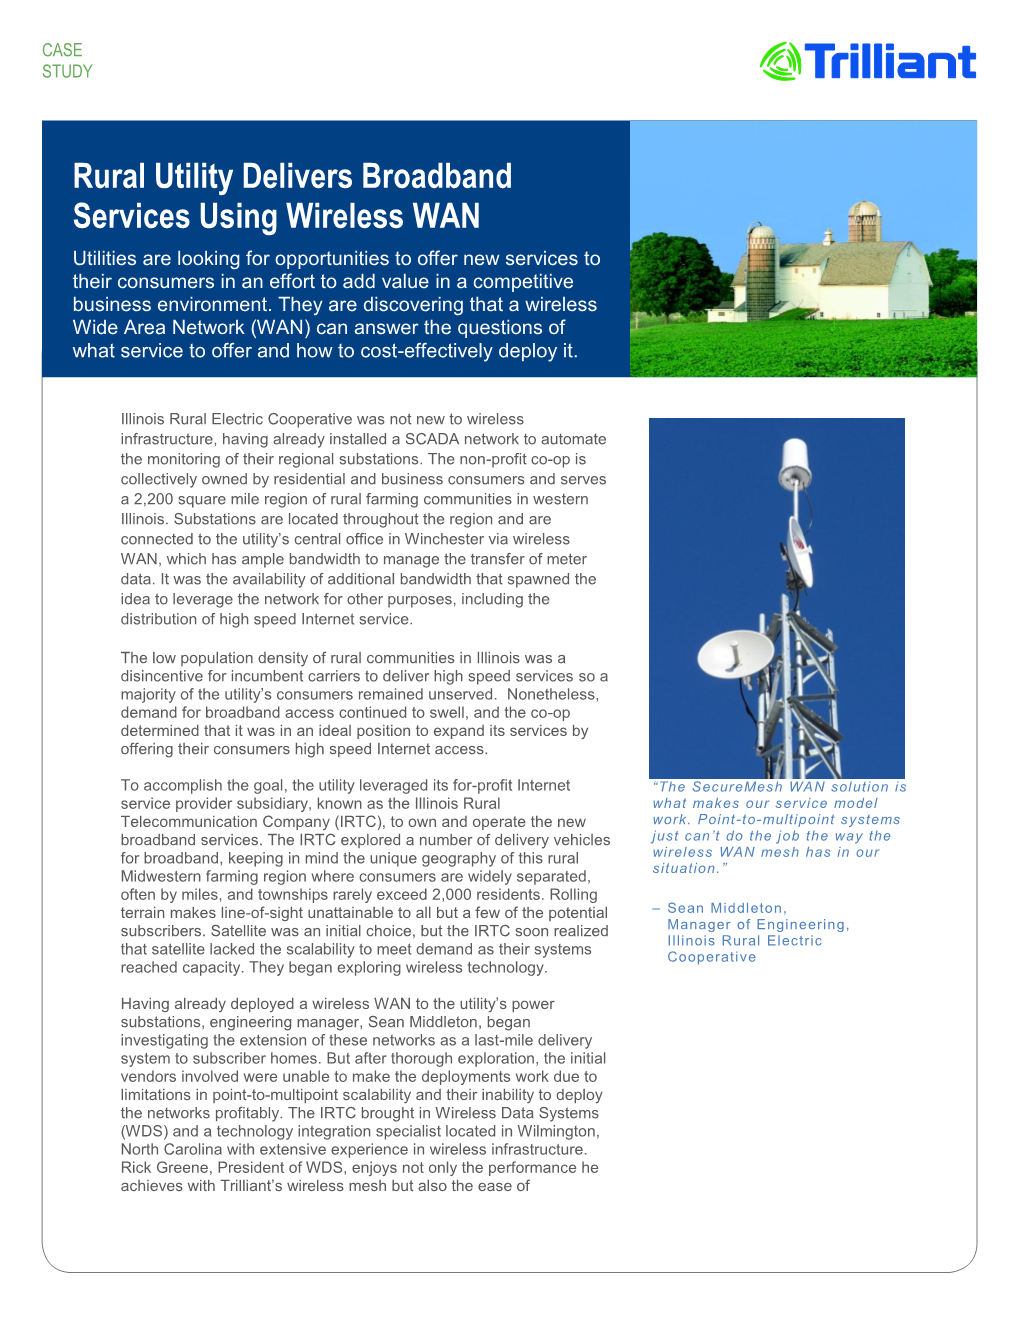 Rural Utility Delivers Broadband Services Using Wireless